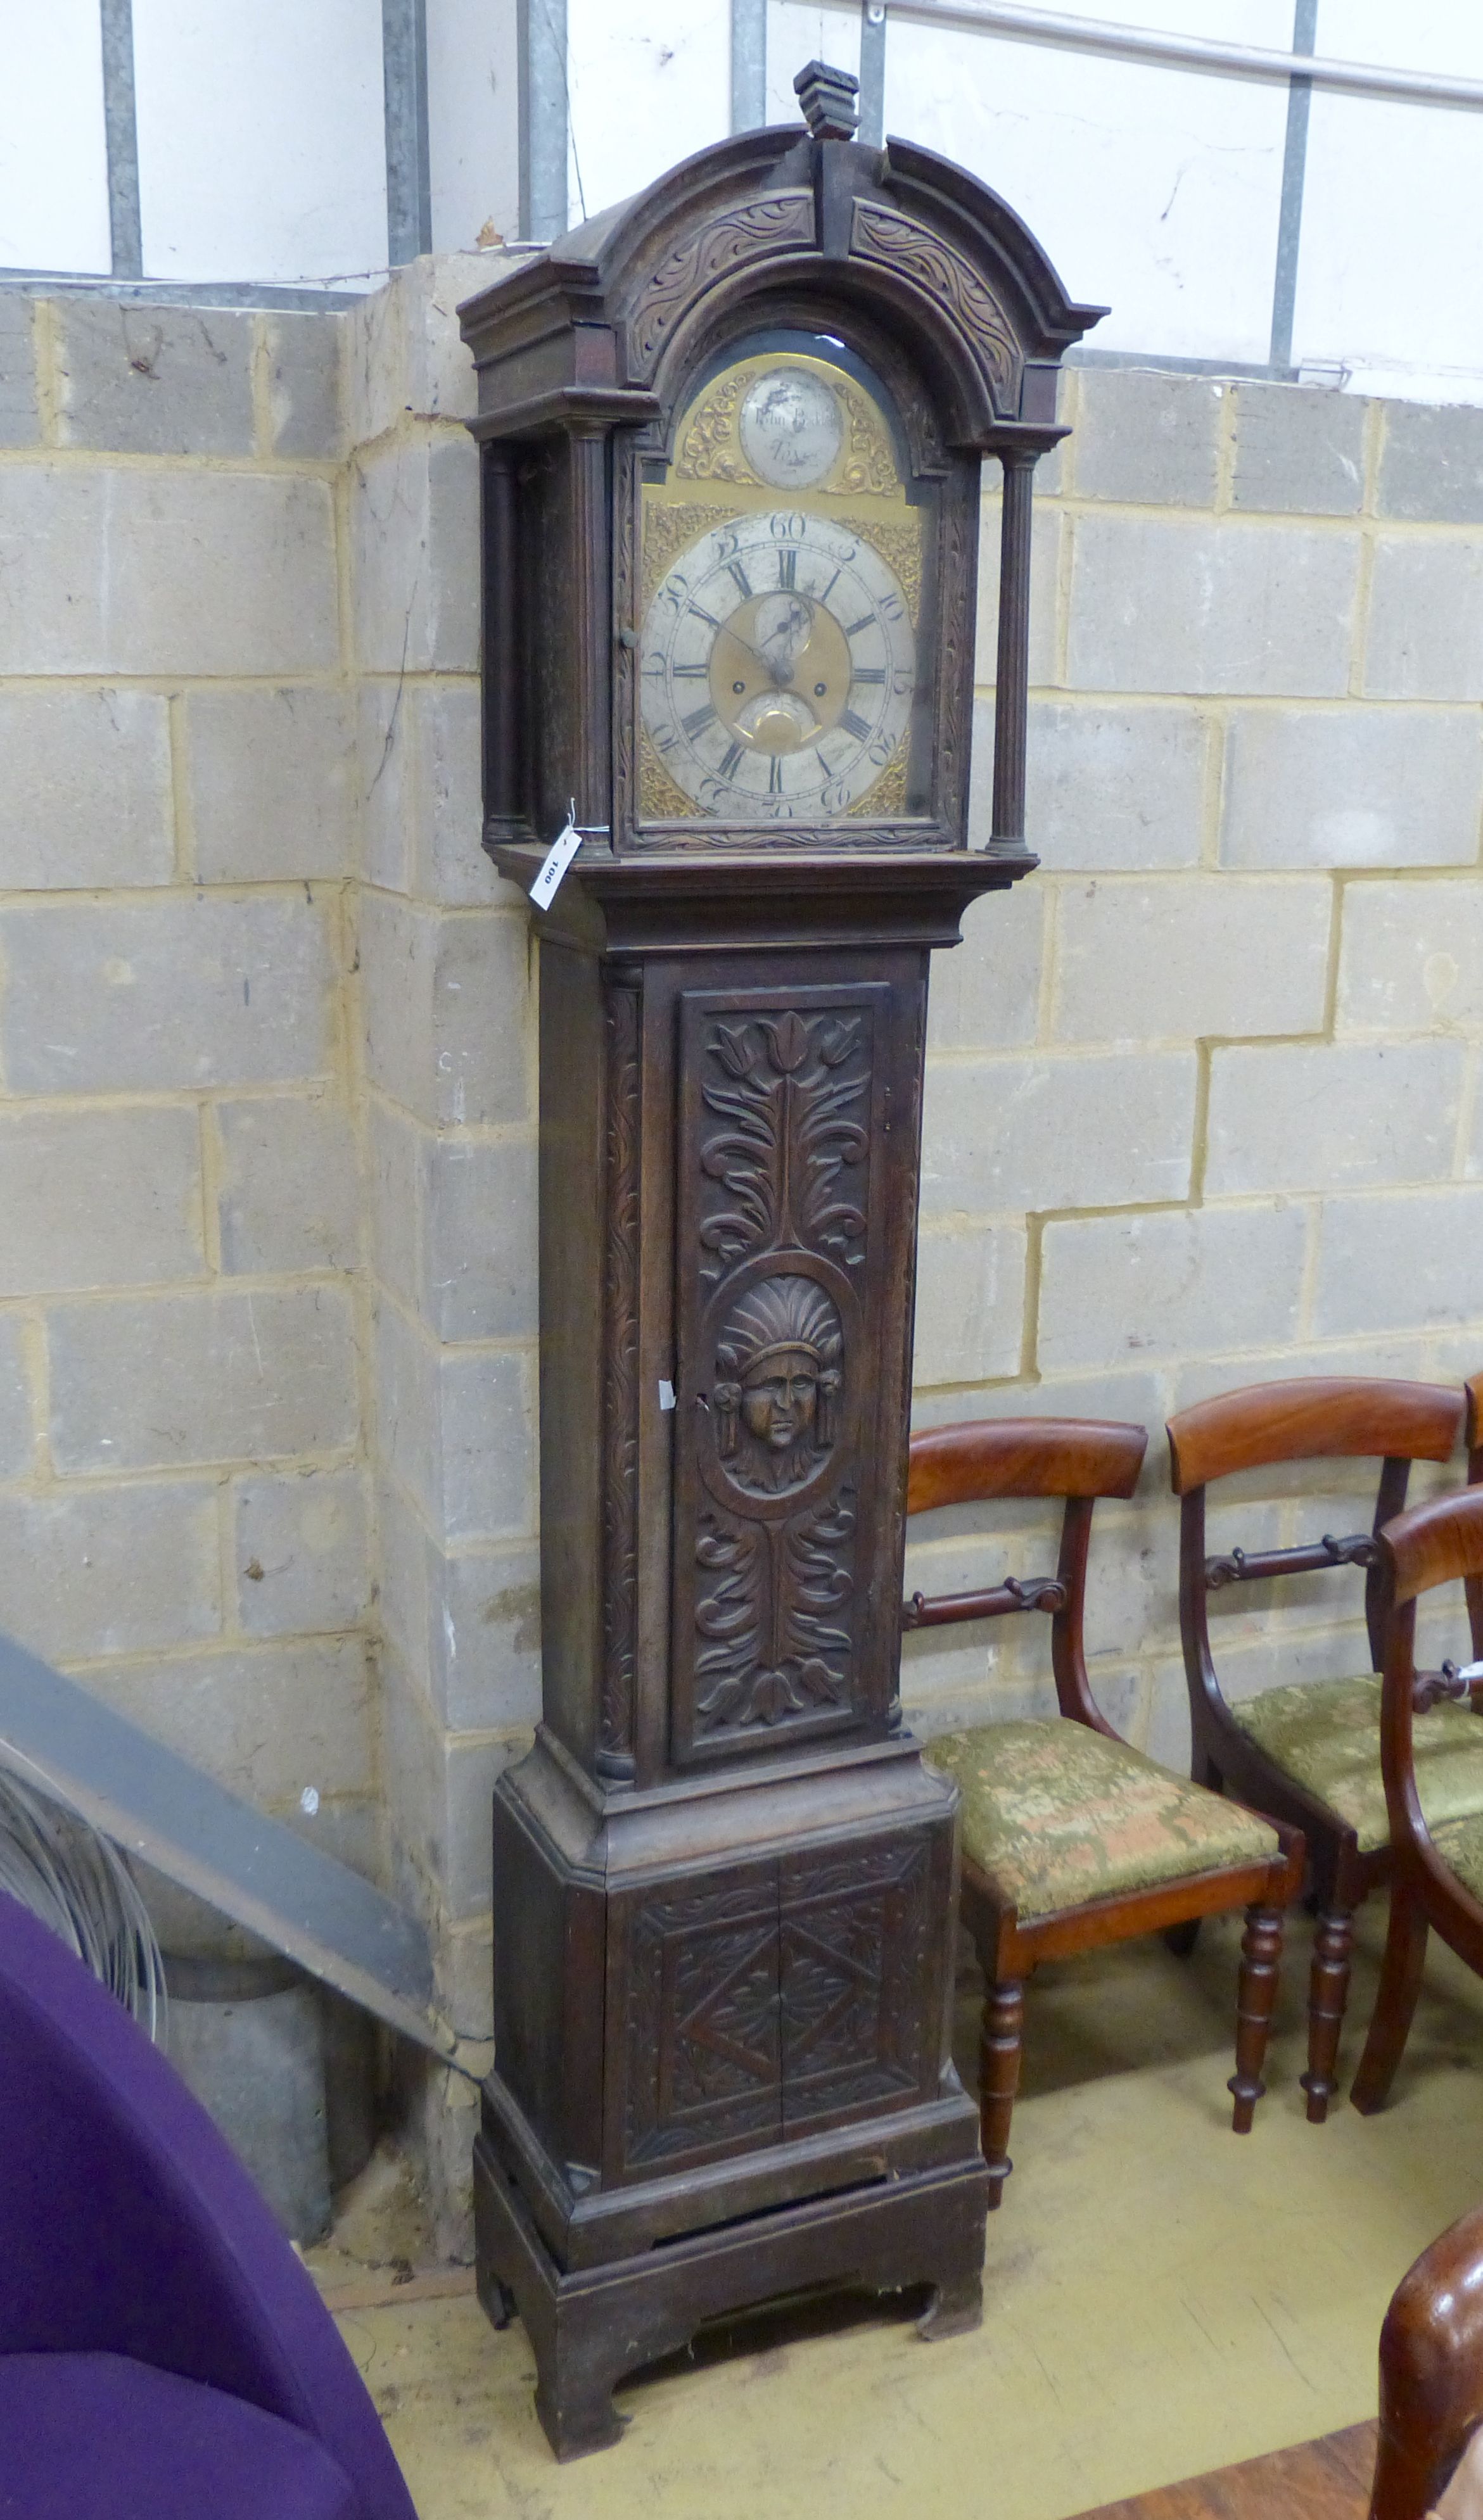 John Badely of Tong. A George III carved oak eight day longcase clock, height 228cm